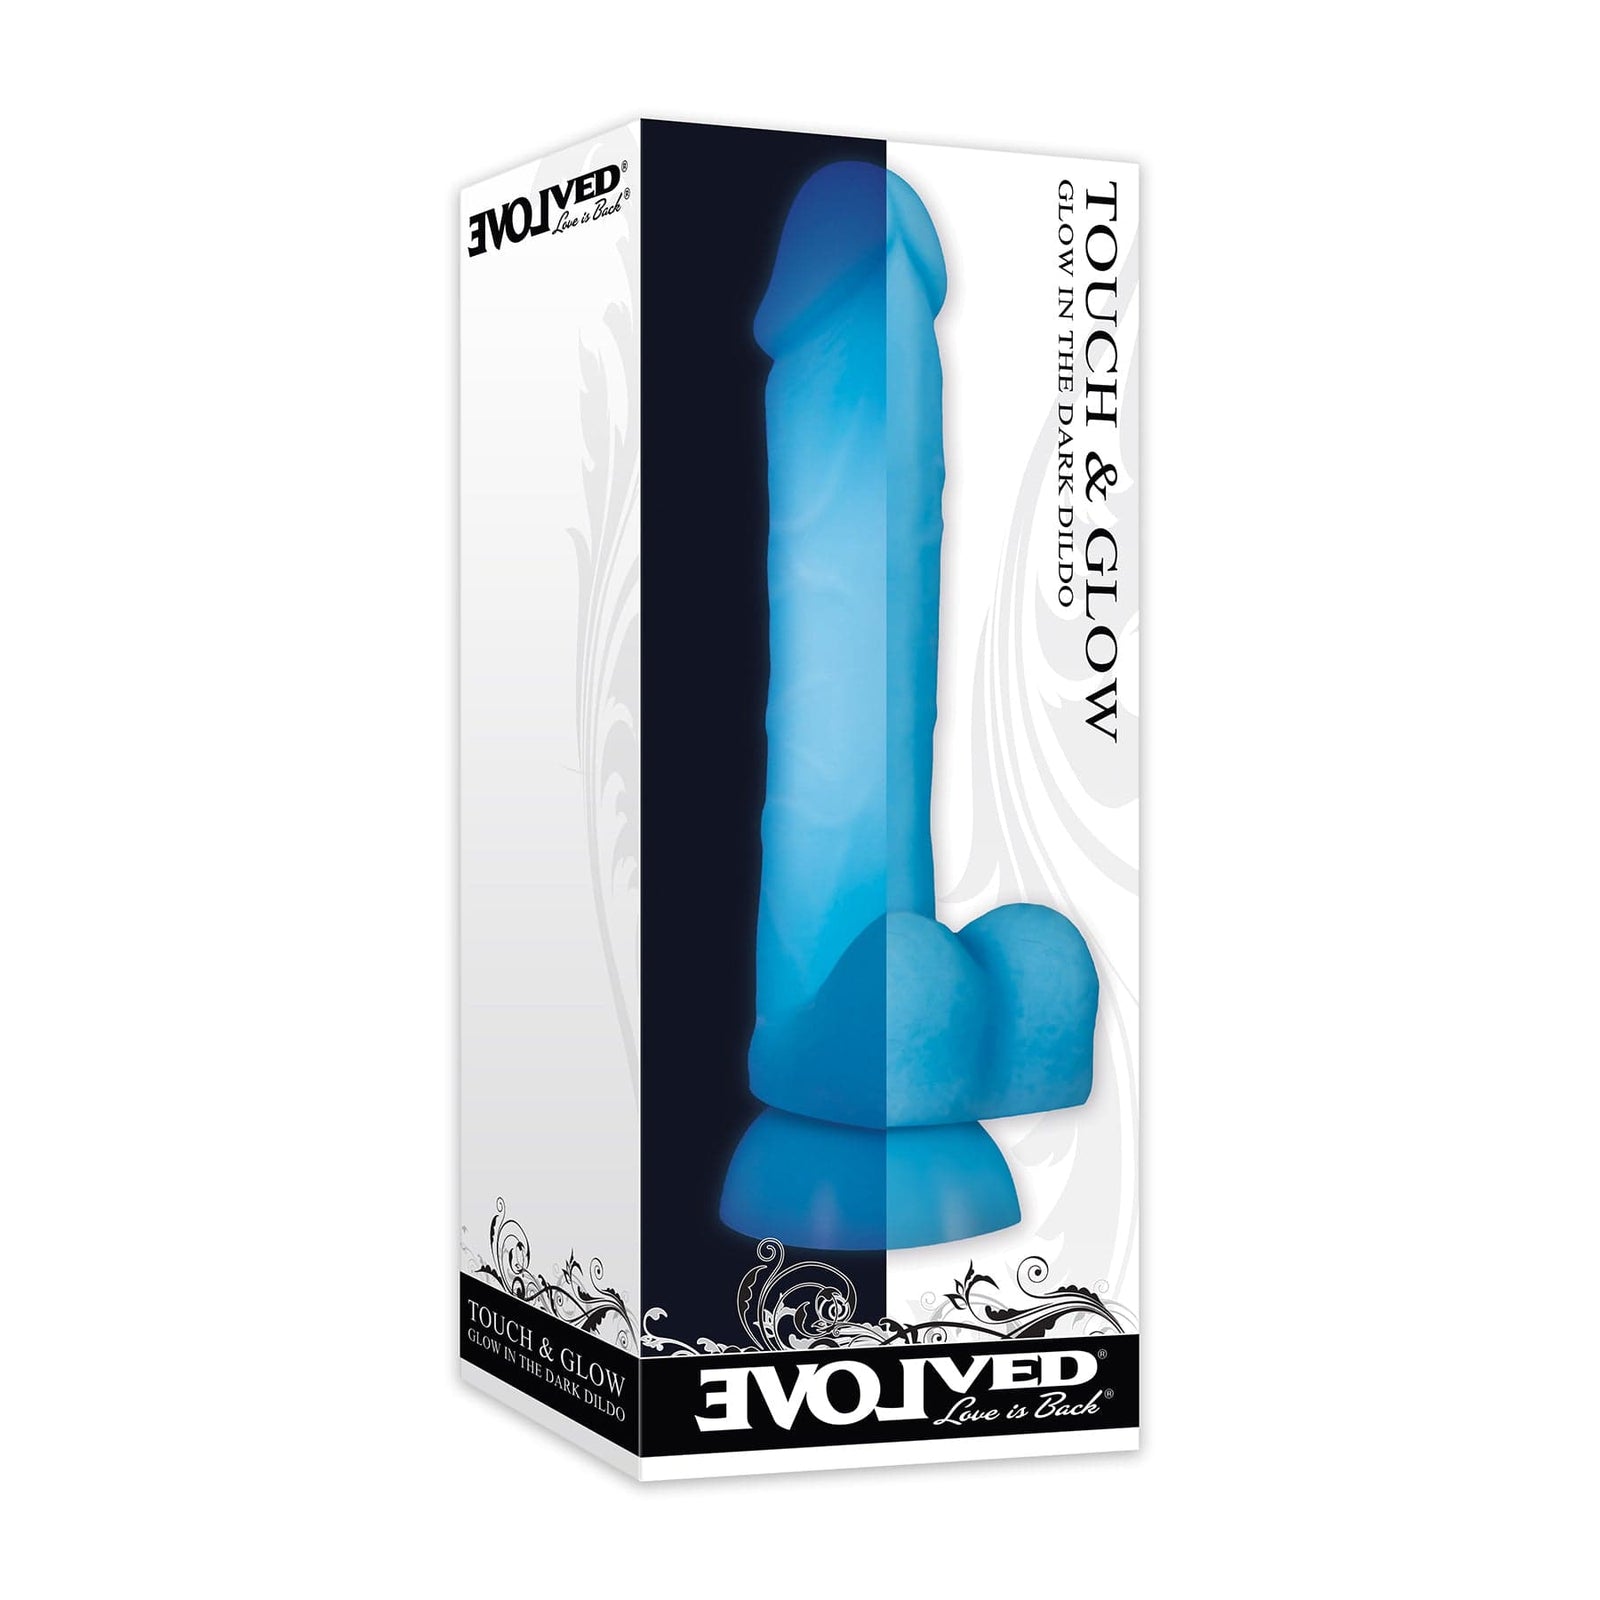 Evolved - Touch and Glow Glow in The Dark Silicone Dildo 8" (Blue) Realistic Dildo with suction cup (Non Vibration) 844477012360 CherryAffairs